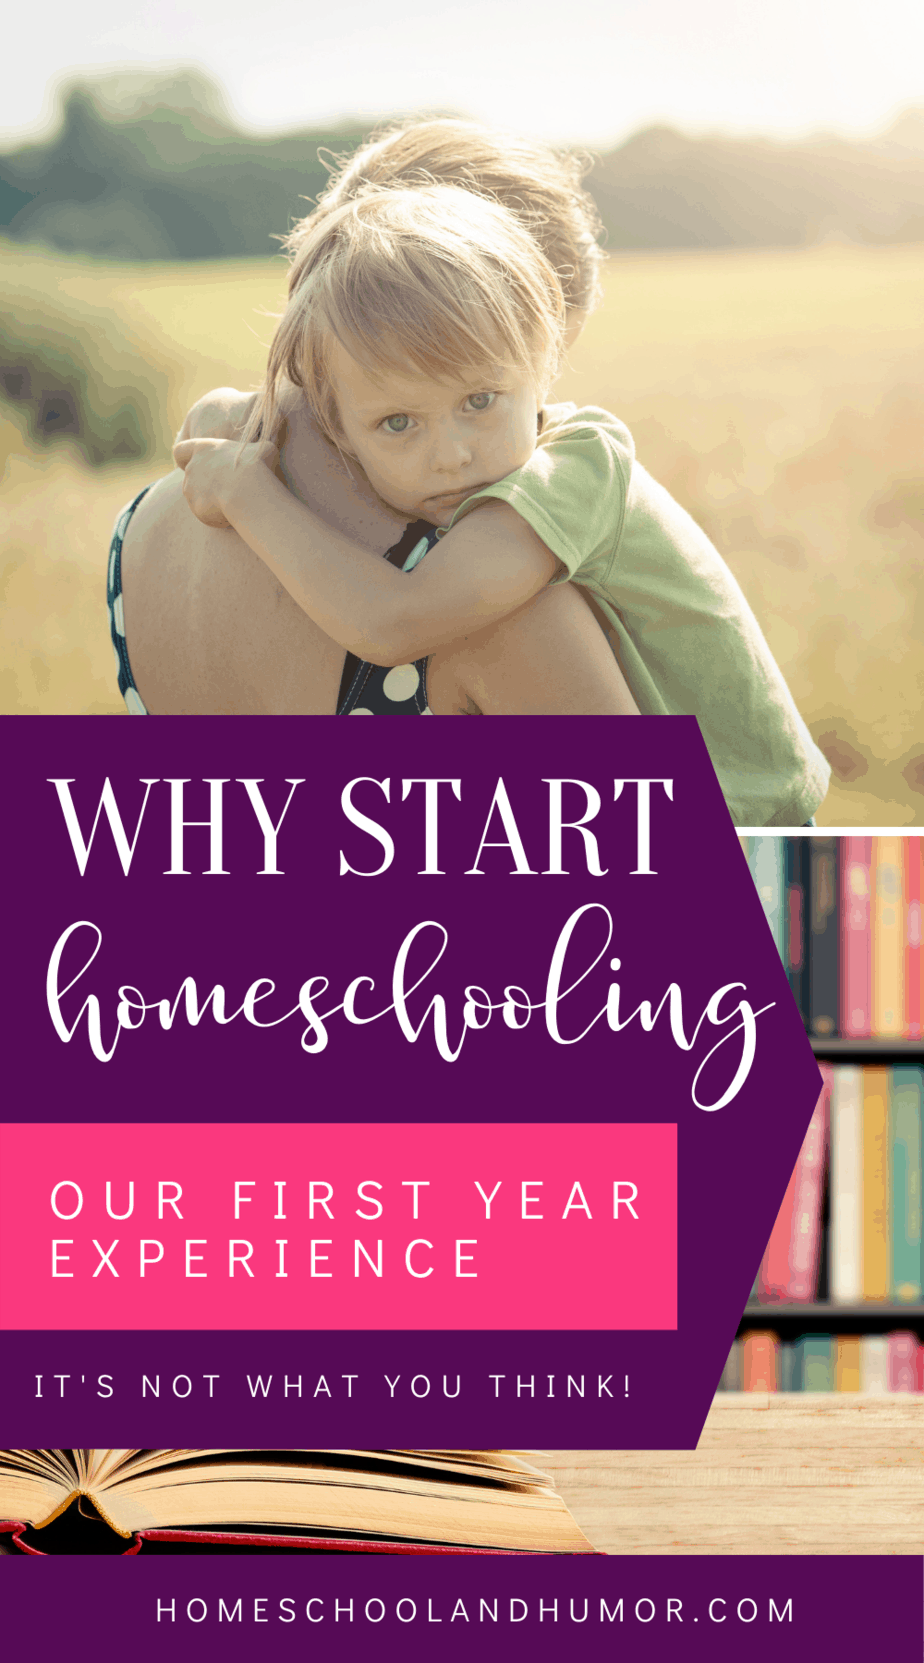 Our Homeschool Experience: Why Homeschooling Was The Best Choice For My Son